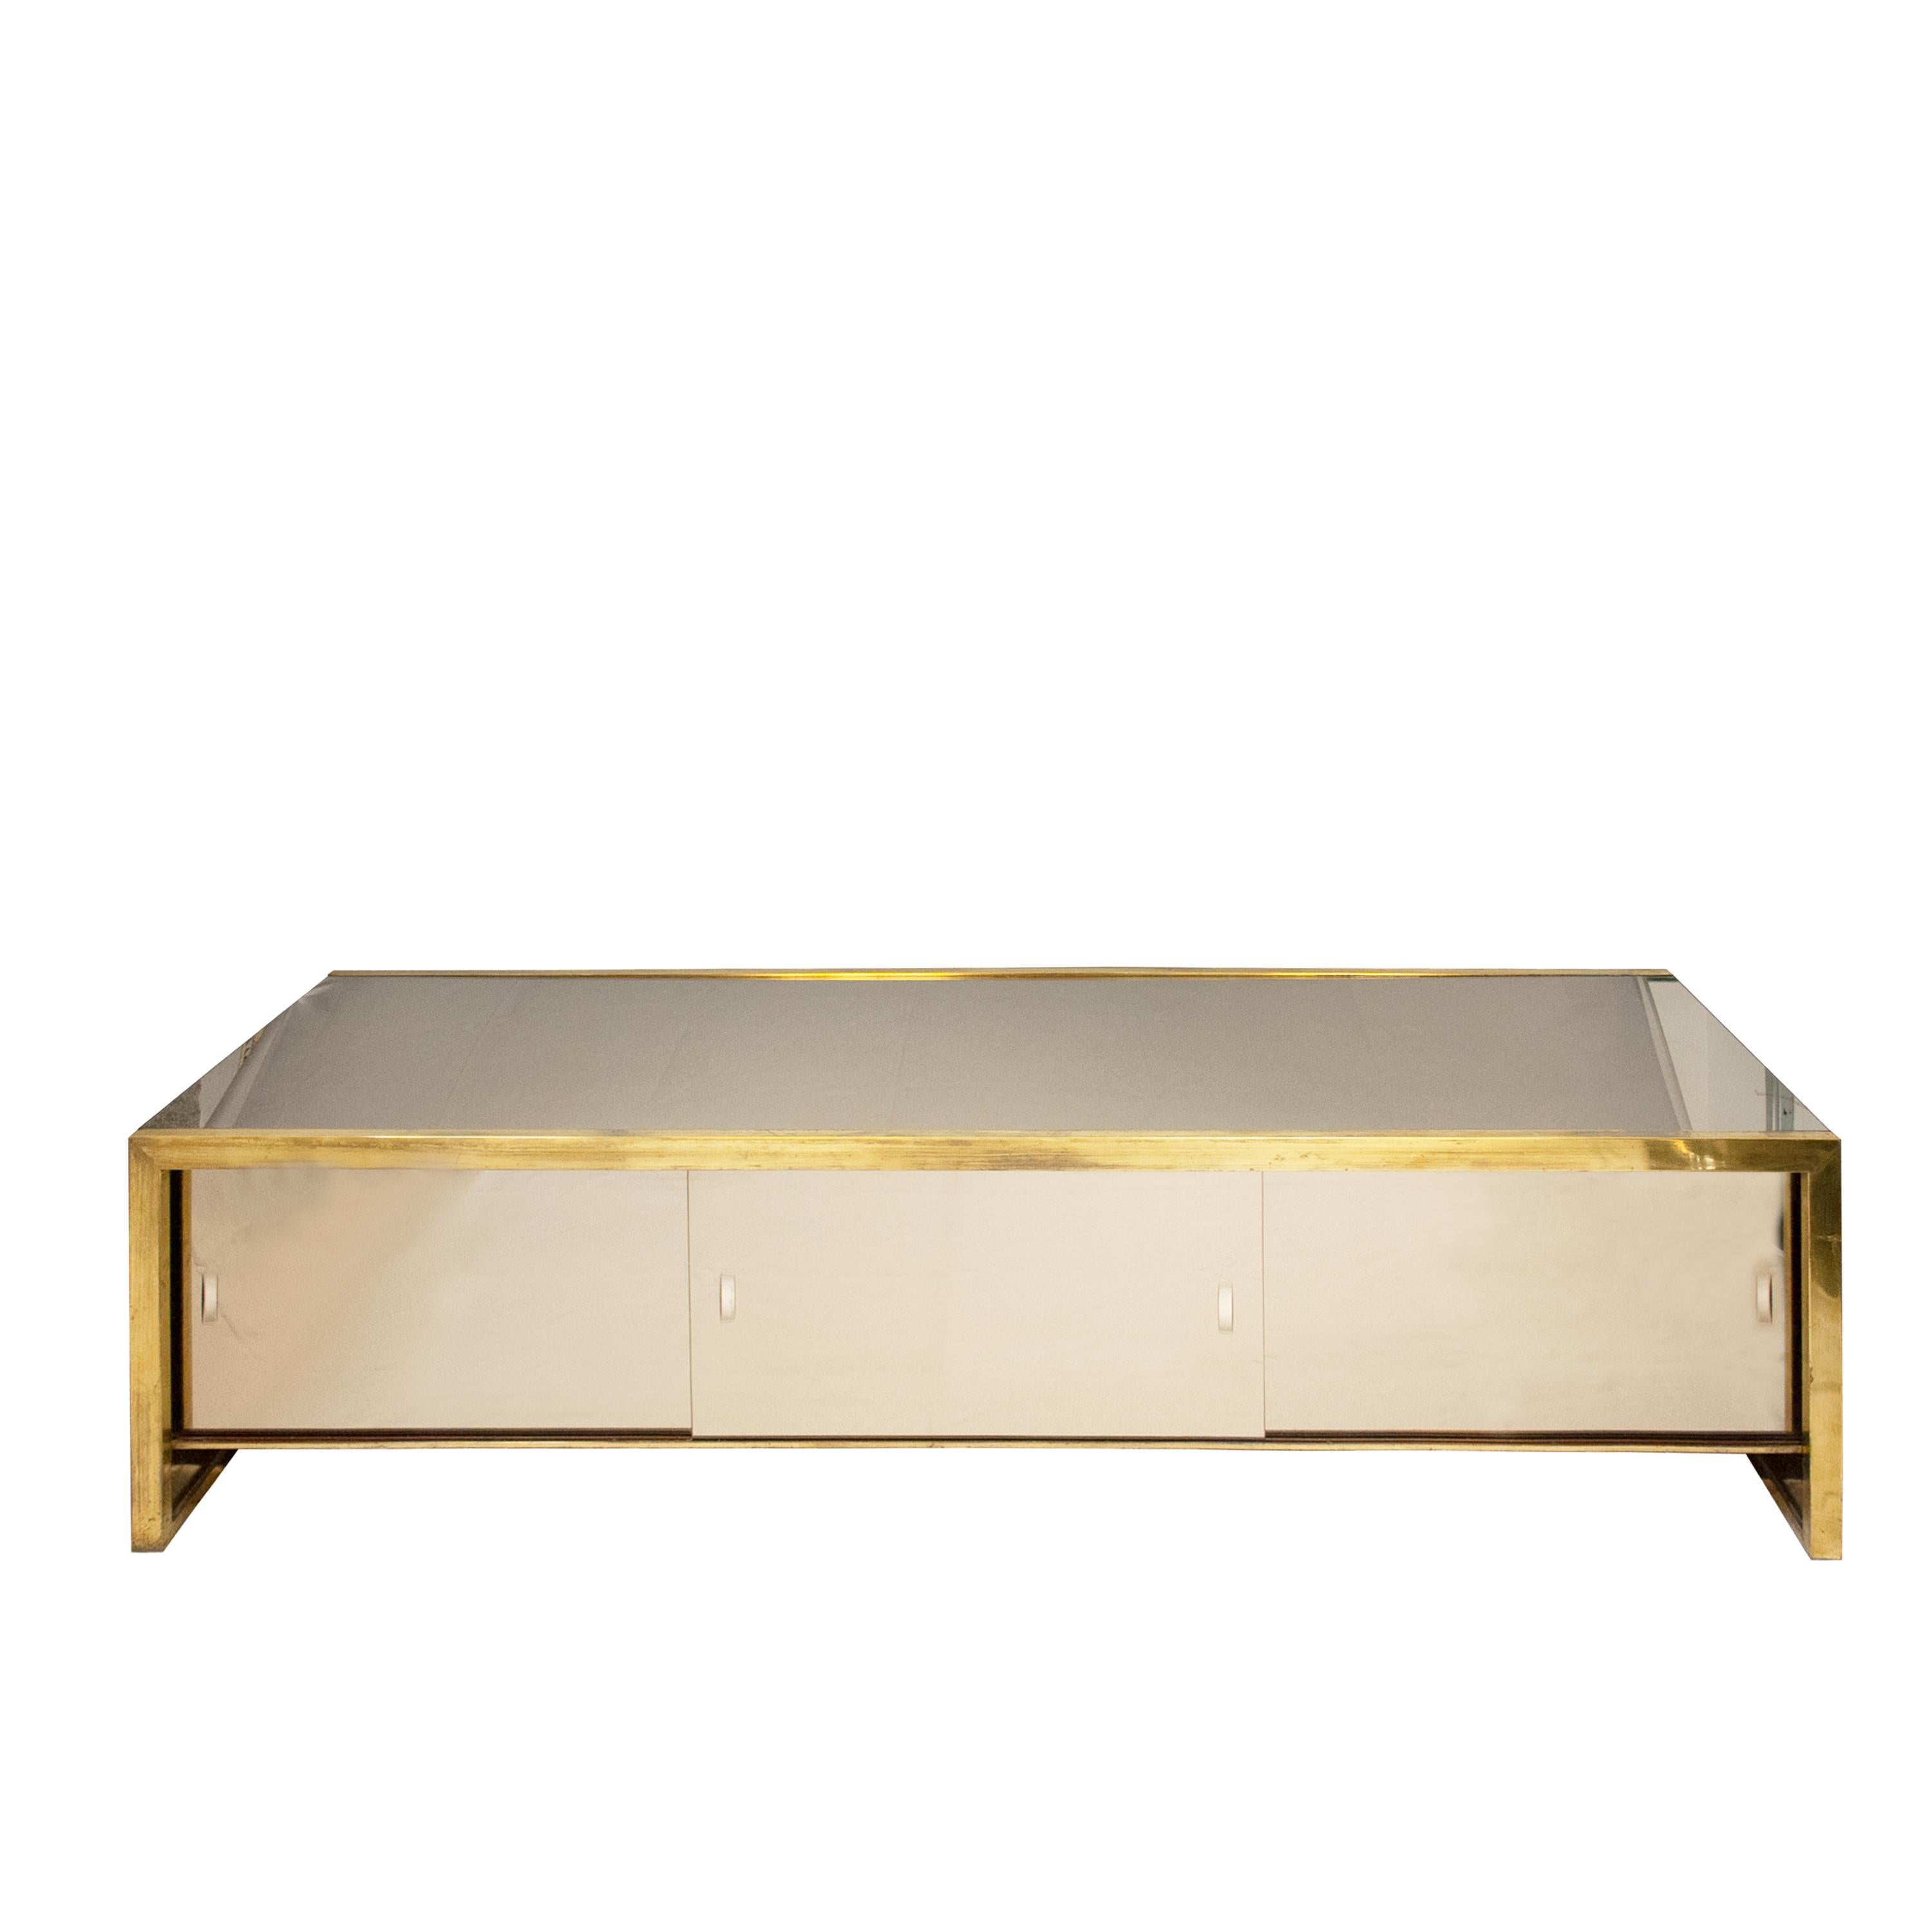 An Italian three-door mirrored sideboard from the 1970s, In the style of Willy Rizzo.
The sideboard is made of a birch wood structure, covered with a mirror surface and a brass framework.
It contained two wooden drawers and vertical and horizontal